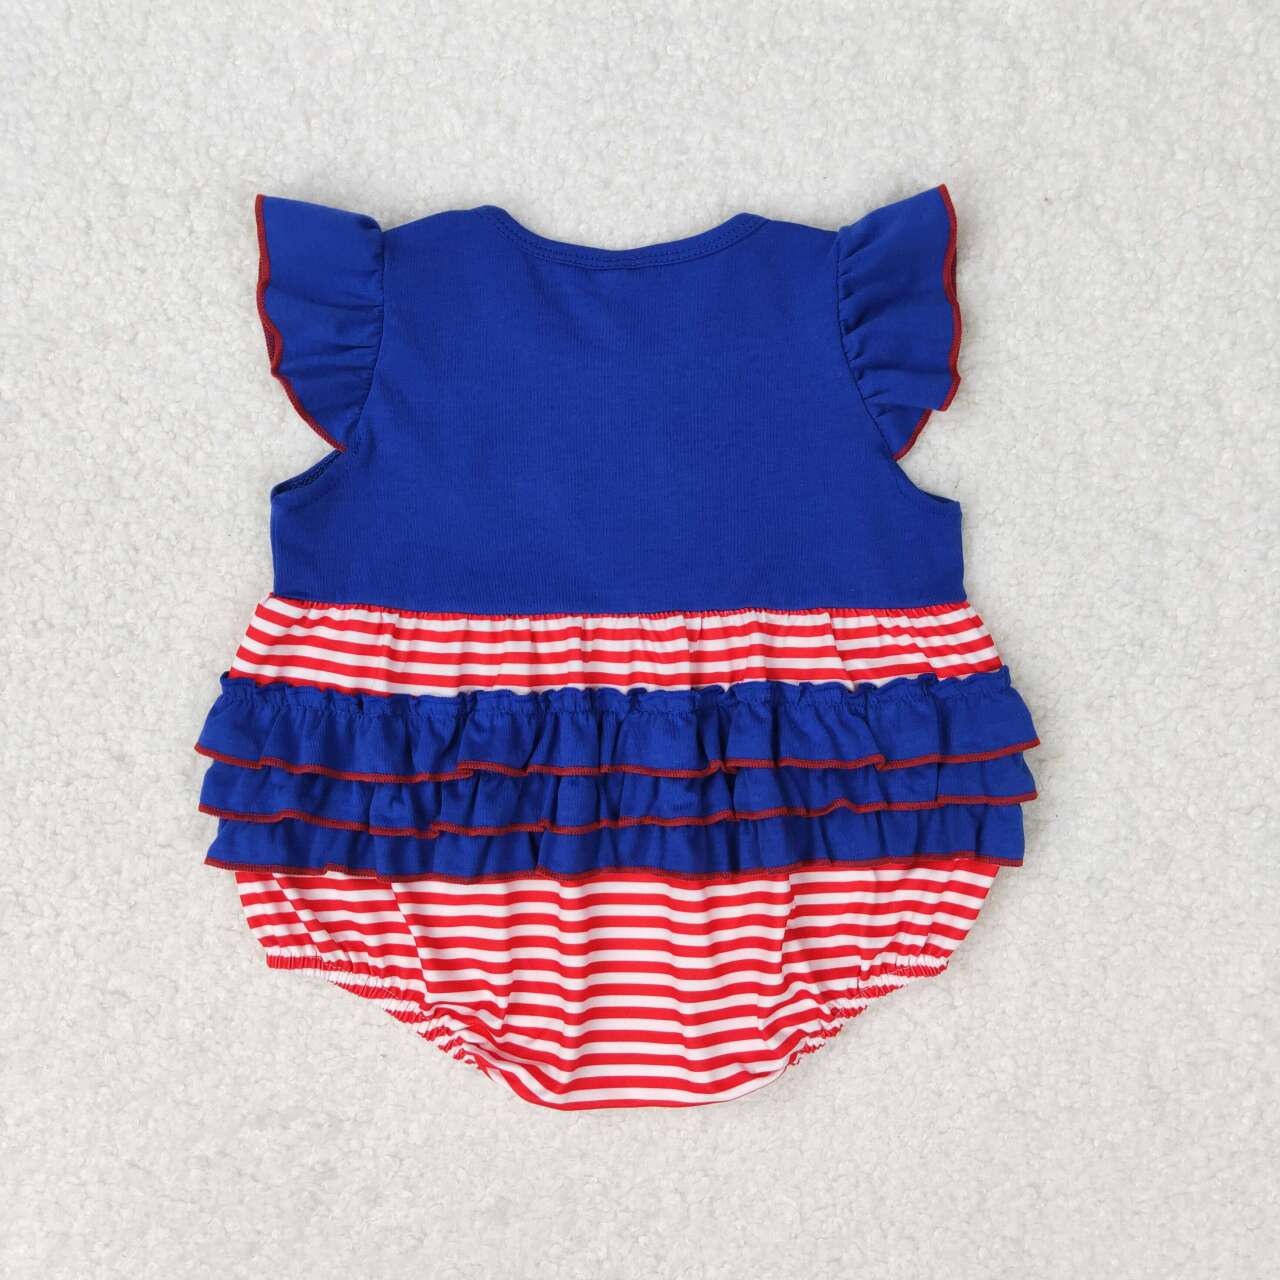 SR1211 Embroidered flag red and white striped navy blue lace vest jumpsuit